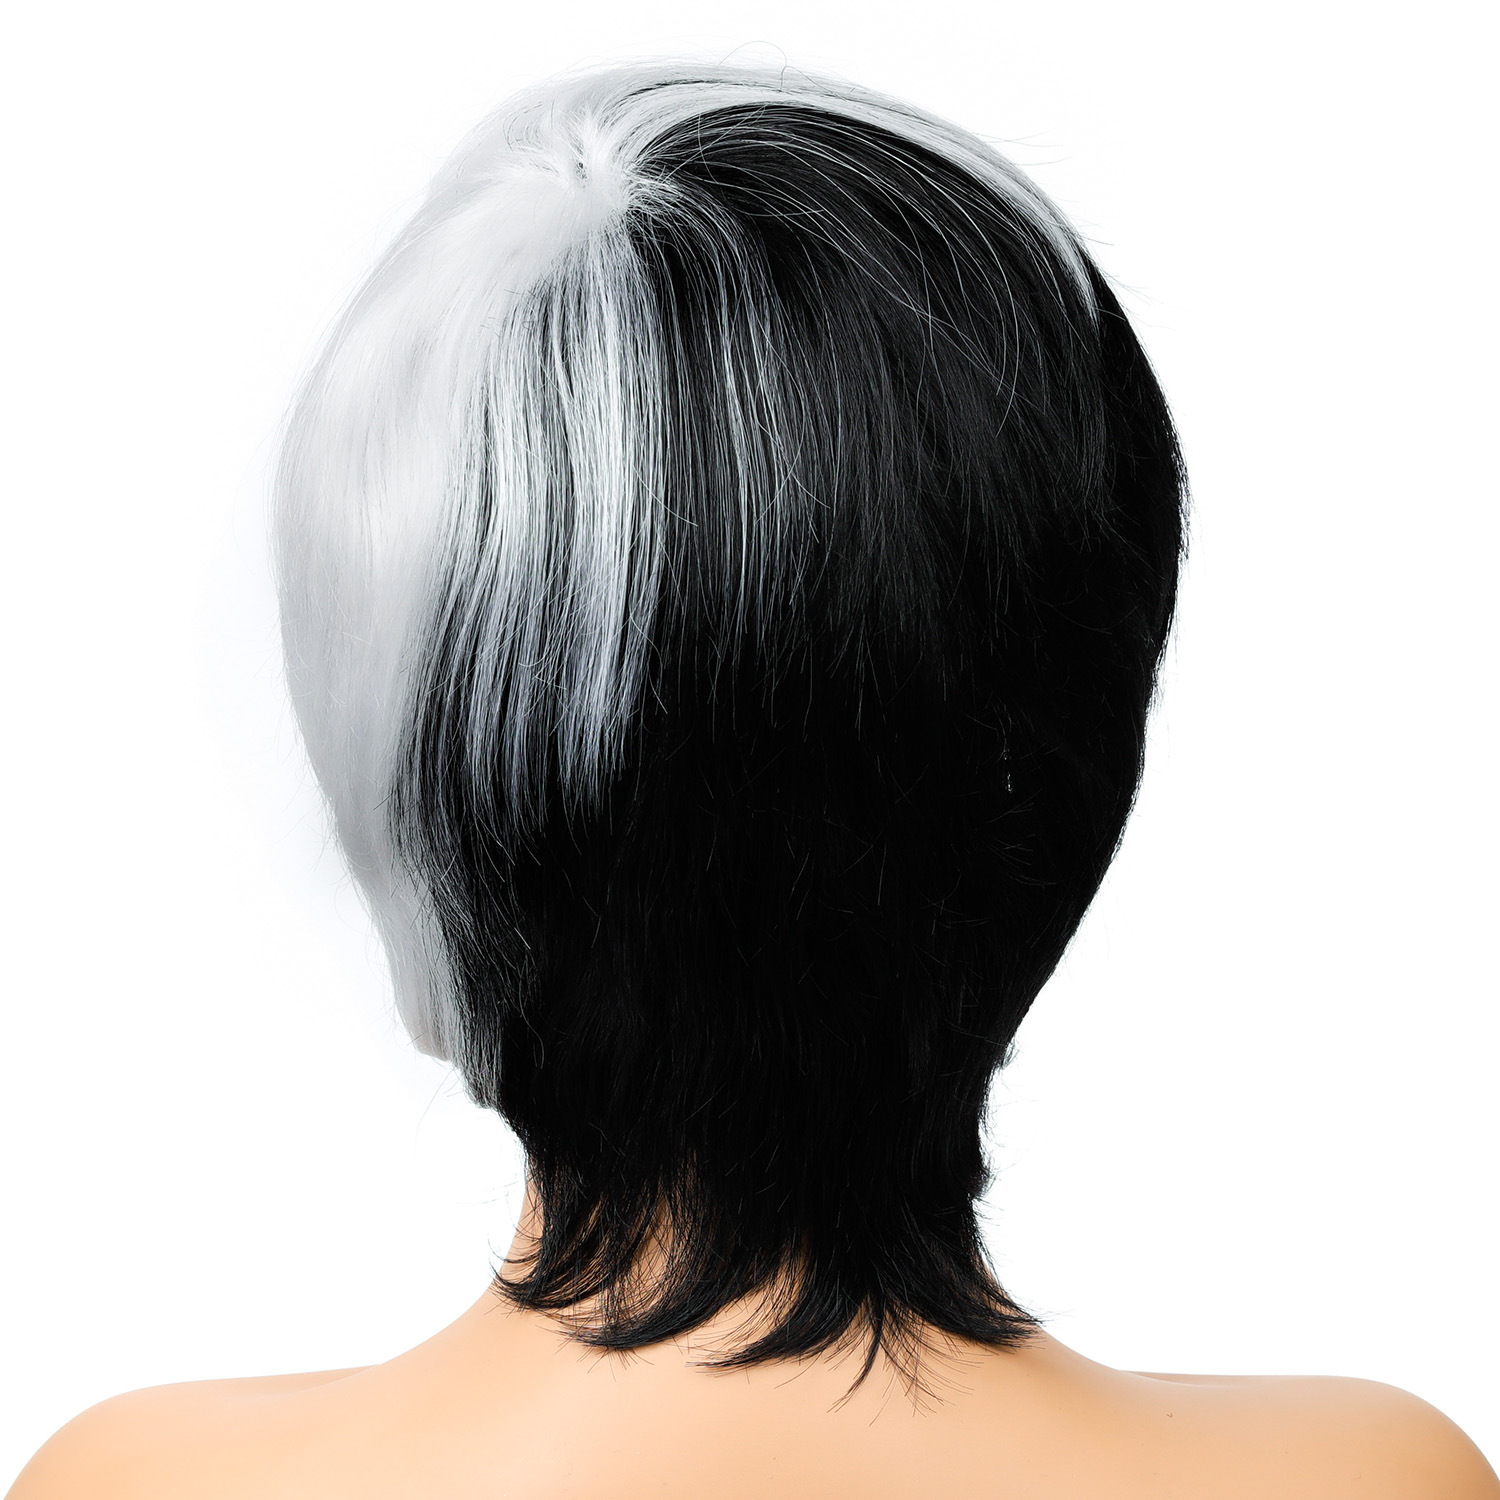 a fashion wig with black and white short hair, designed for women who love trendy styles